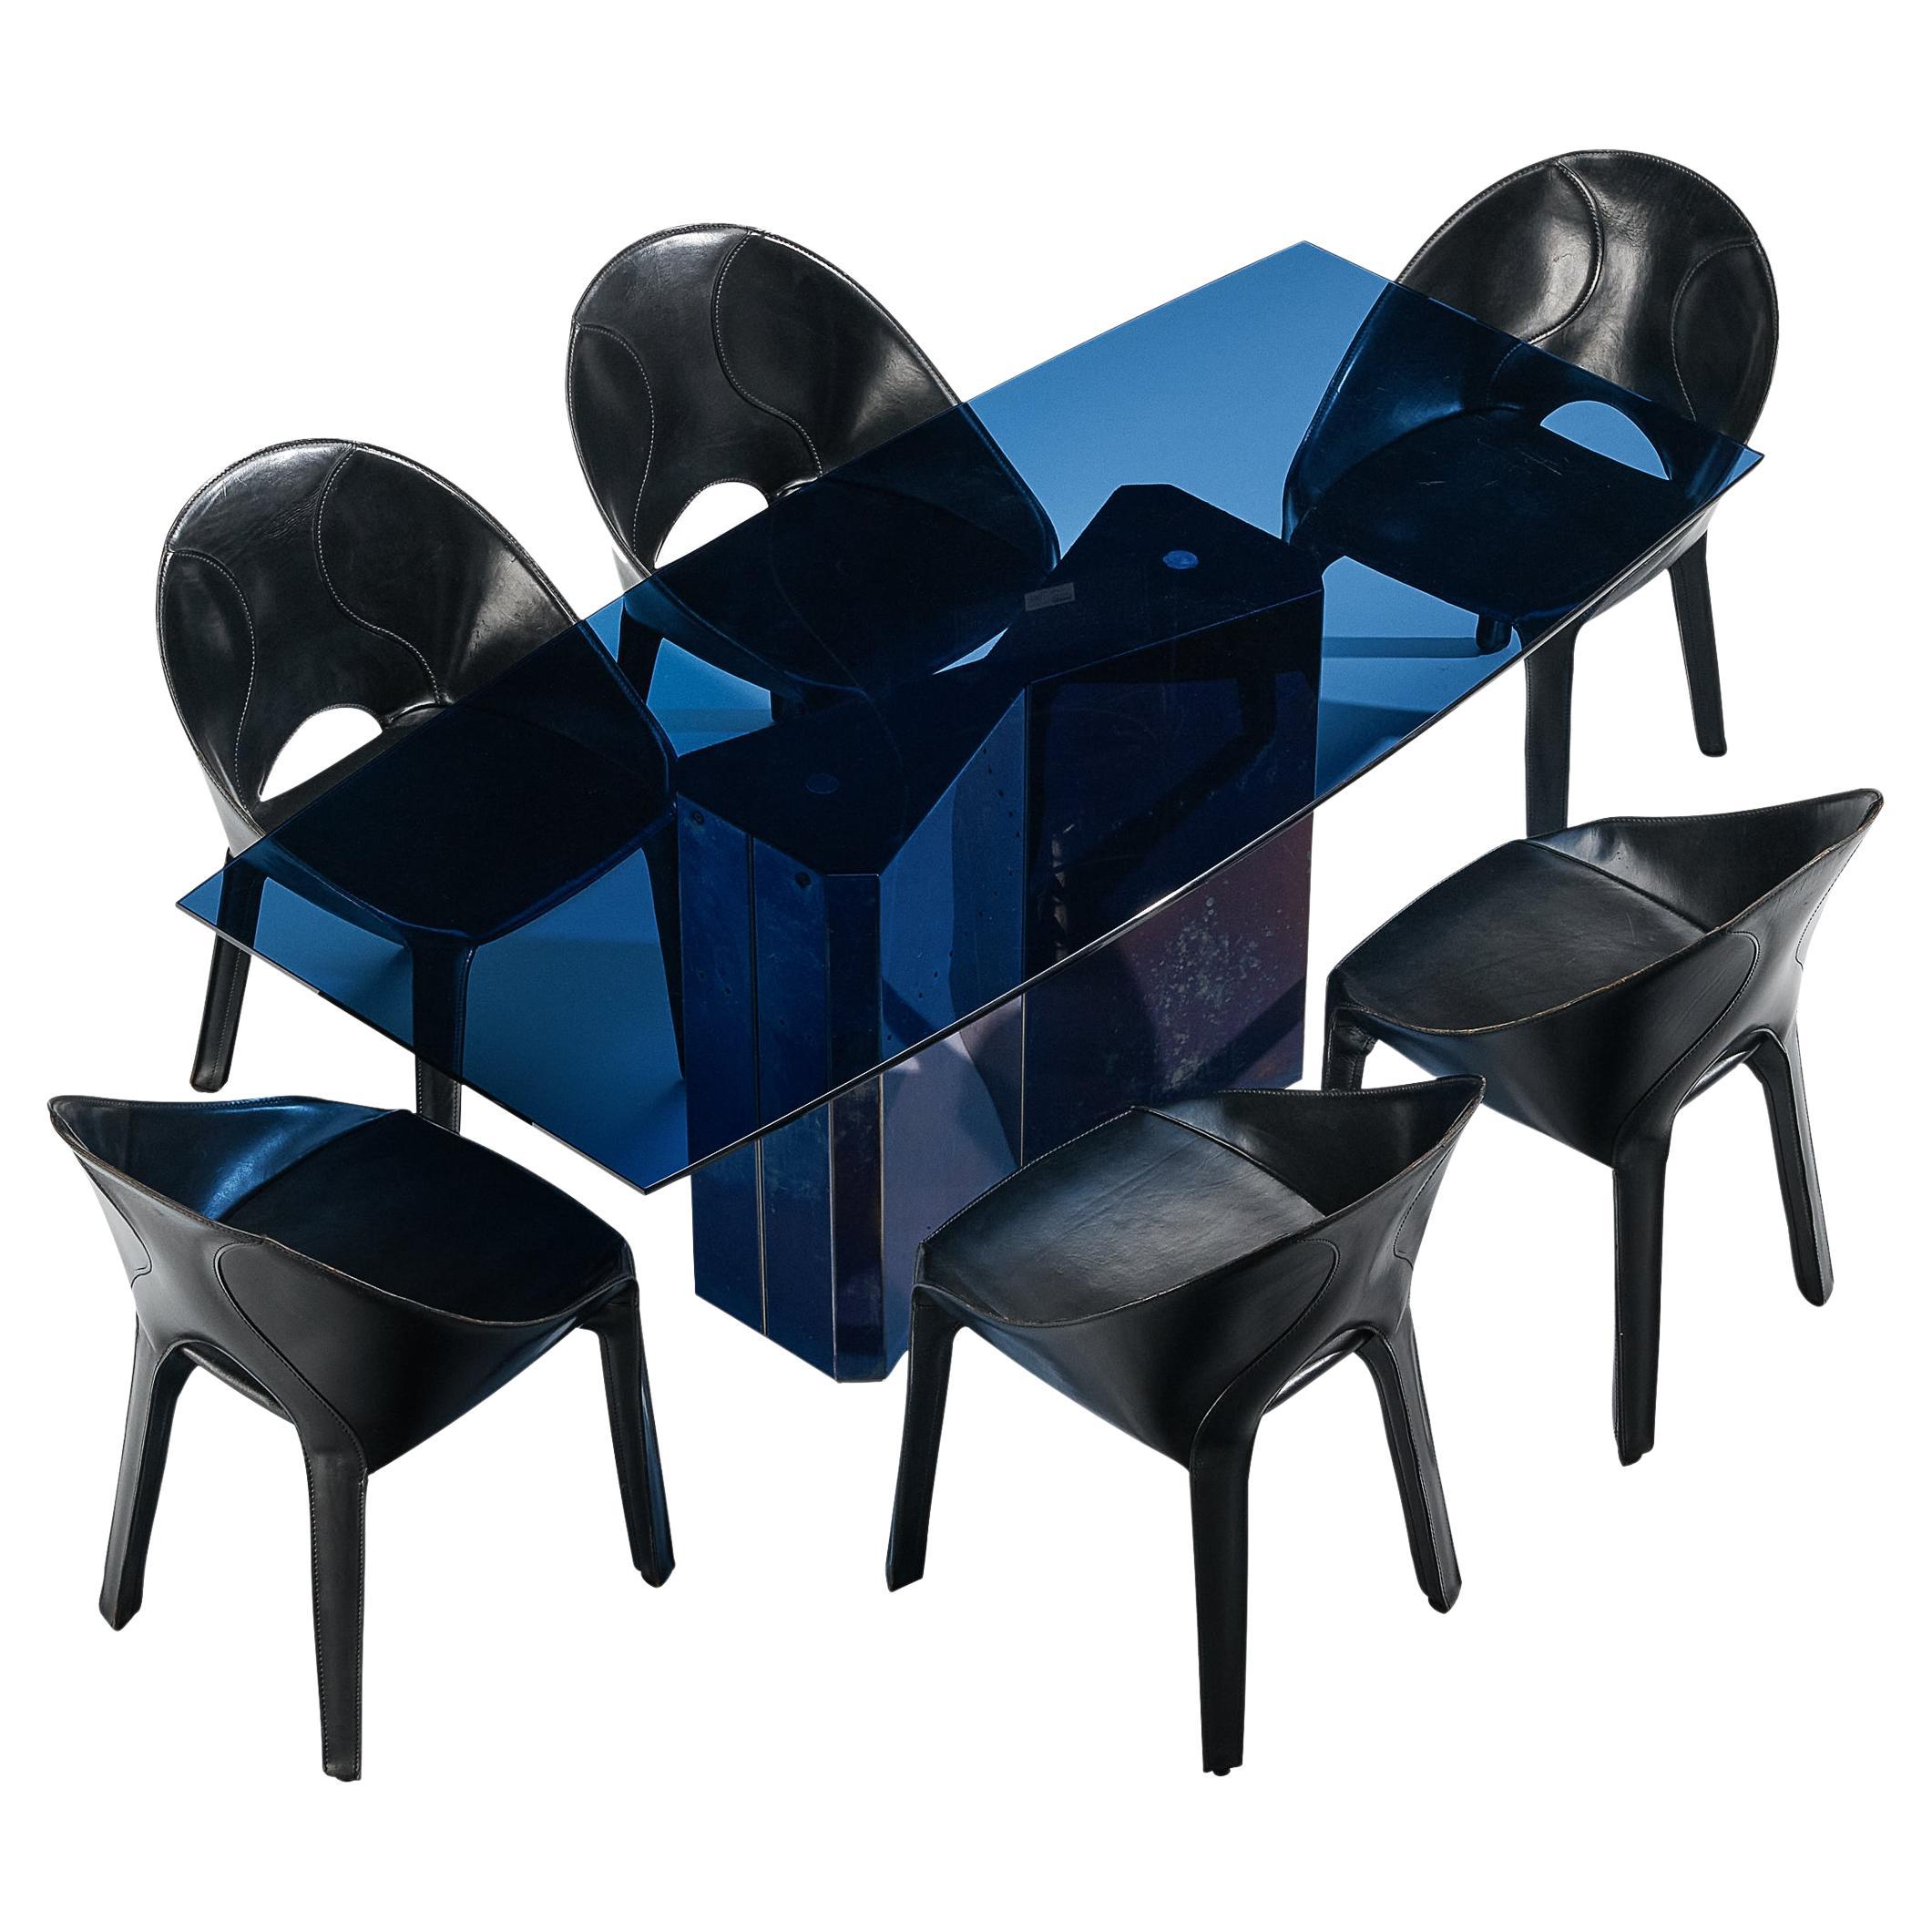 Afra & Tobia Scarpa 'Polygonon' Dining Table & Mario Bellini Dining Chairs